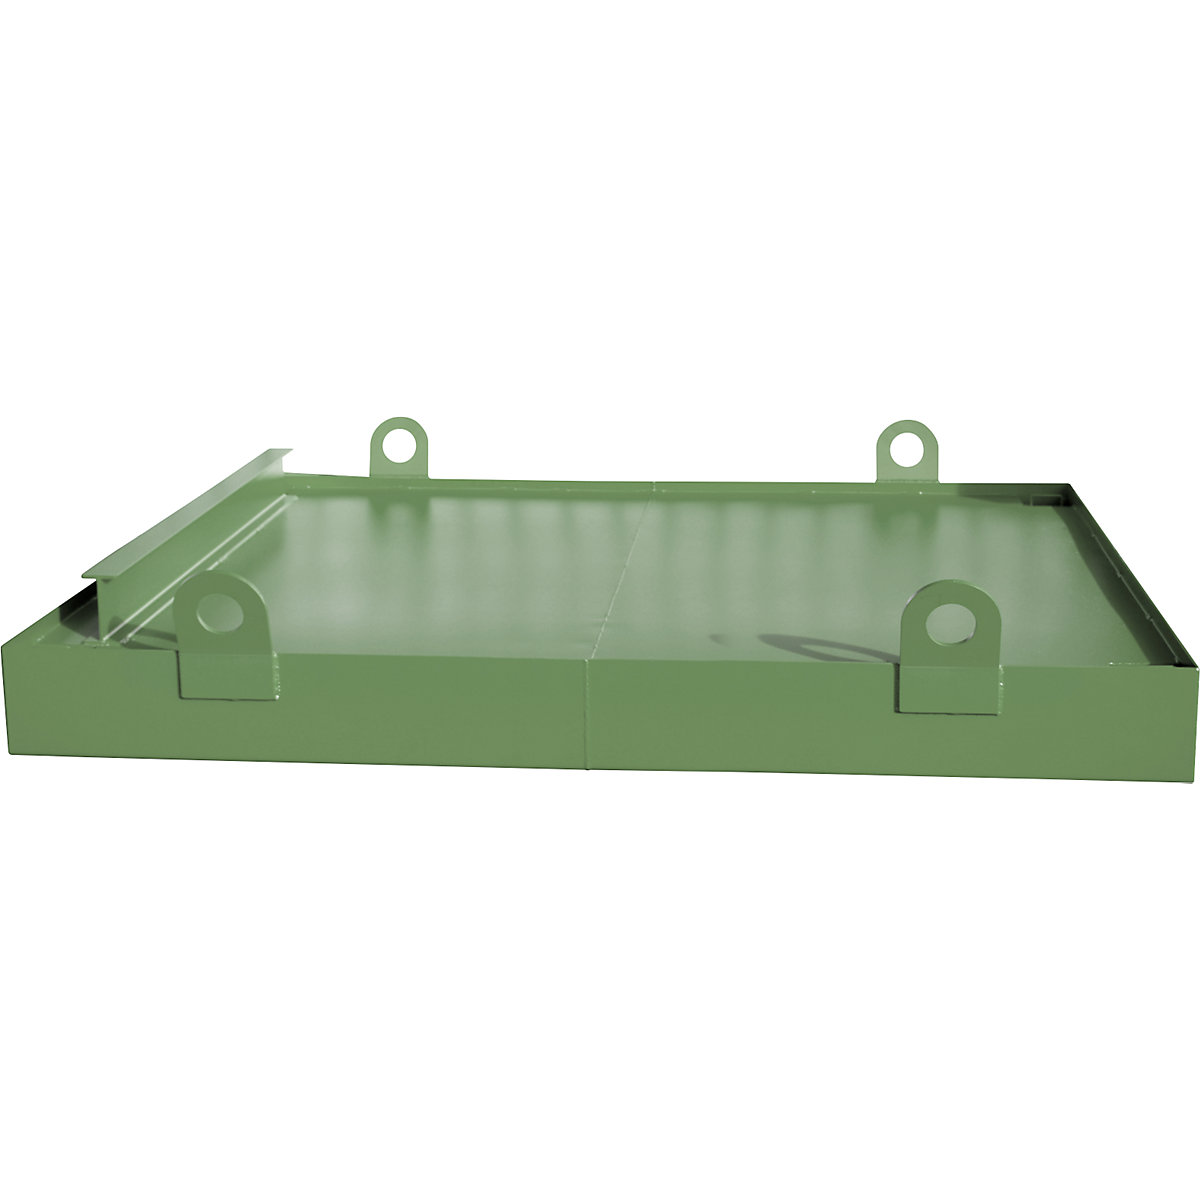 Sump tray for skip trailer – eurokraft pro, for skip trailers, sump capacity 1078 l, green-8